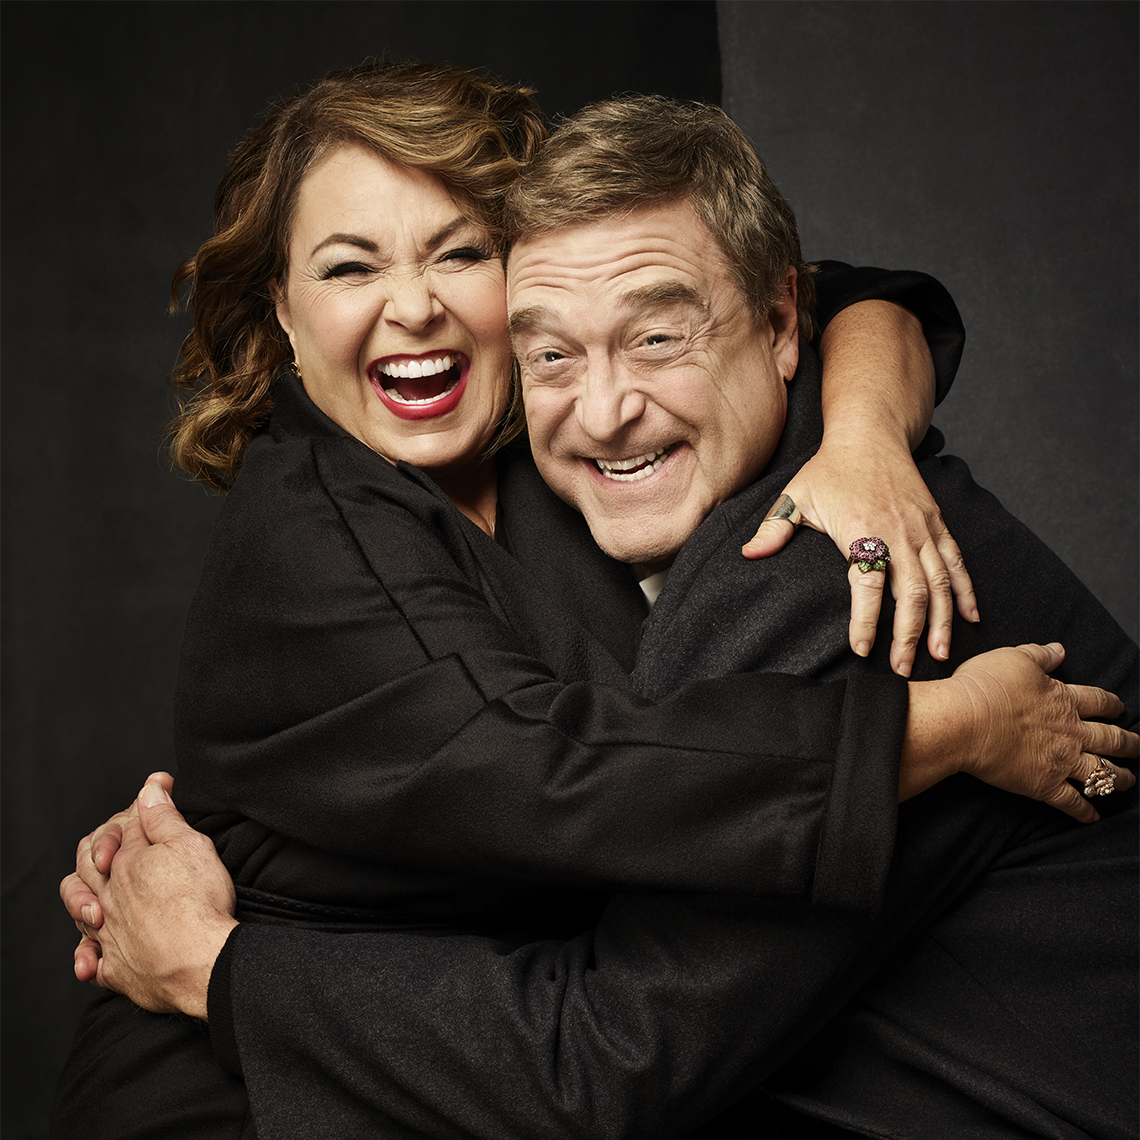 Roseanne Barr and John Goodman laughing and hugging each other